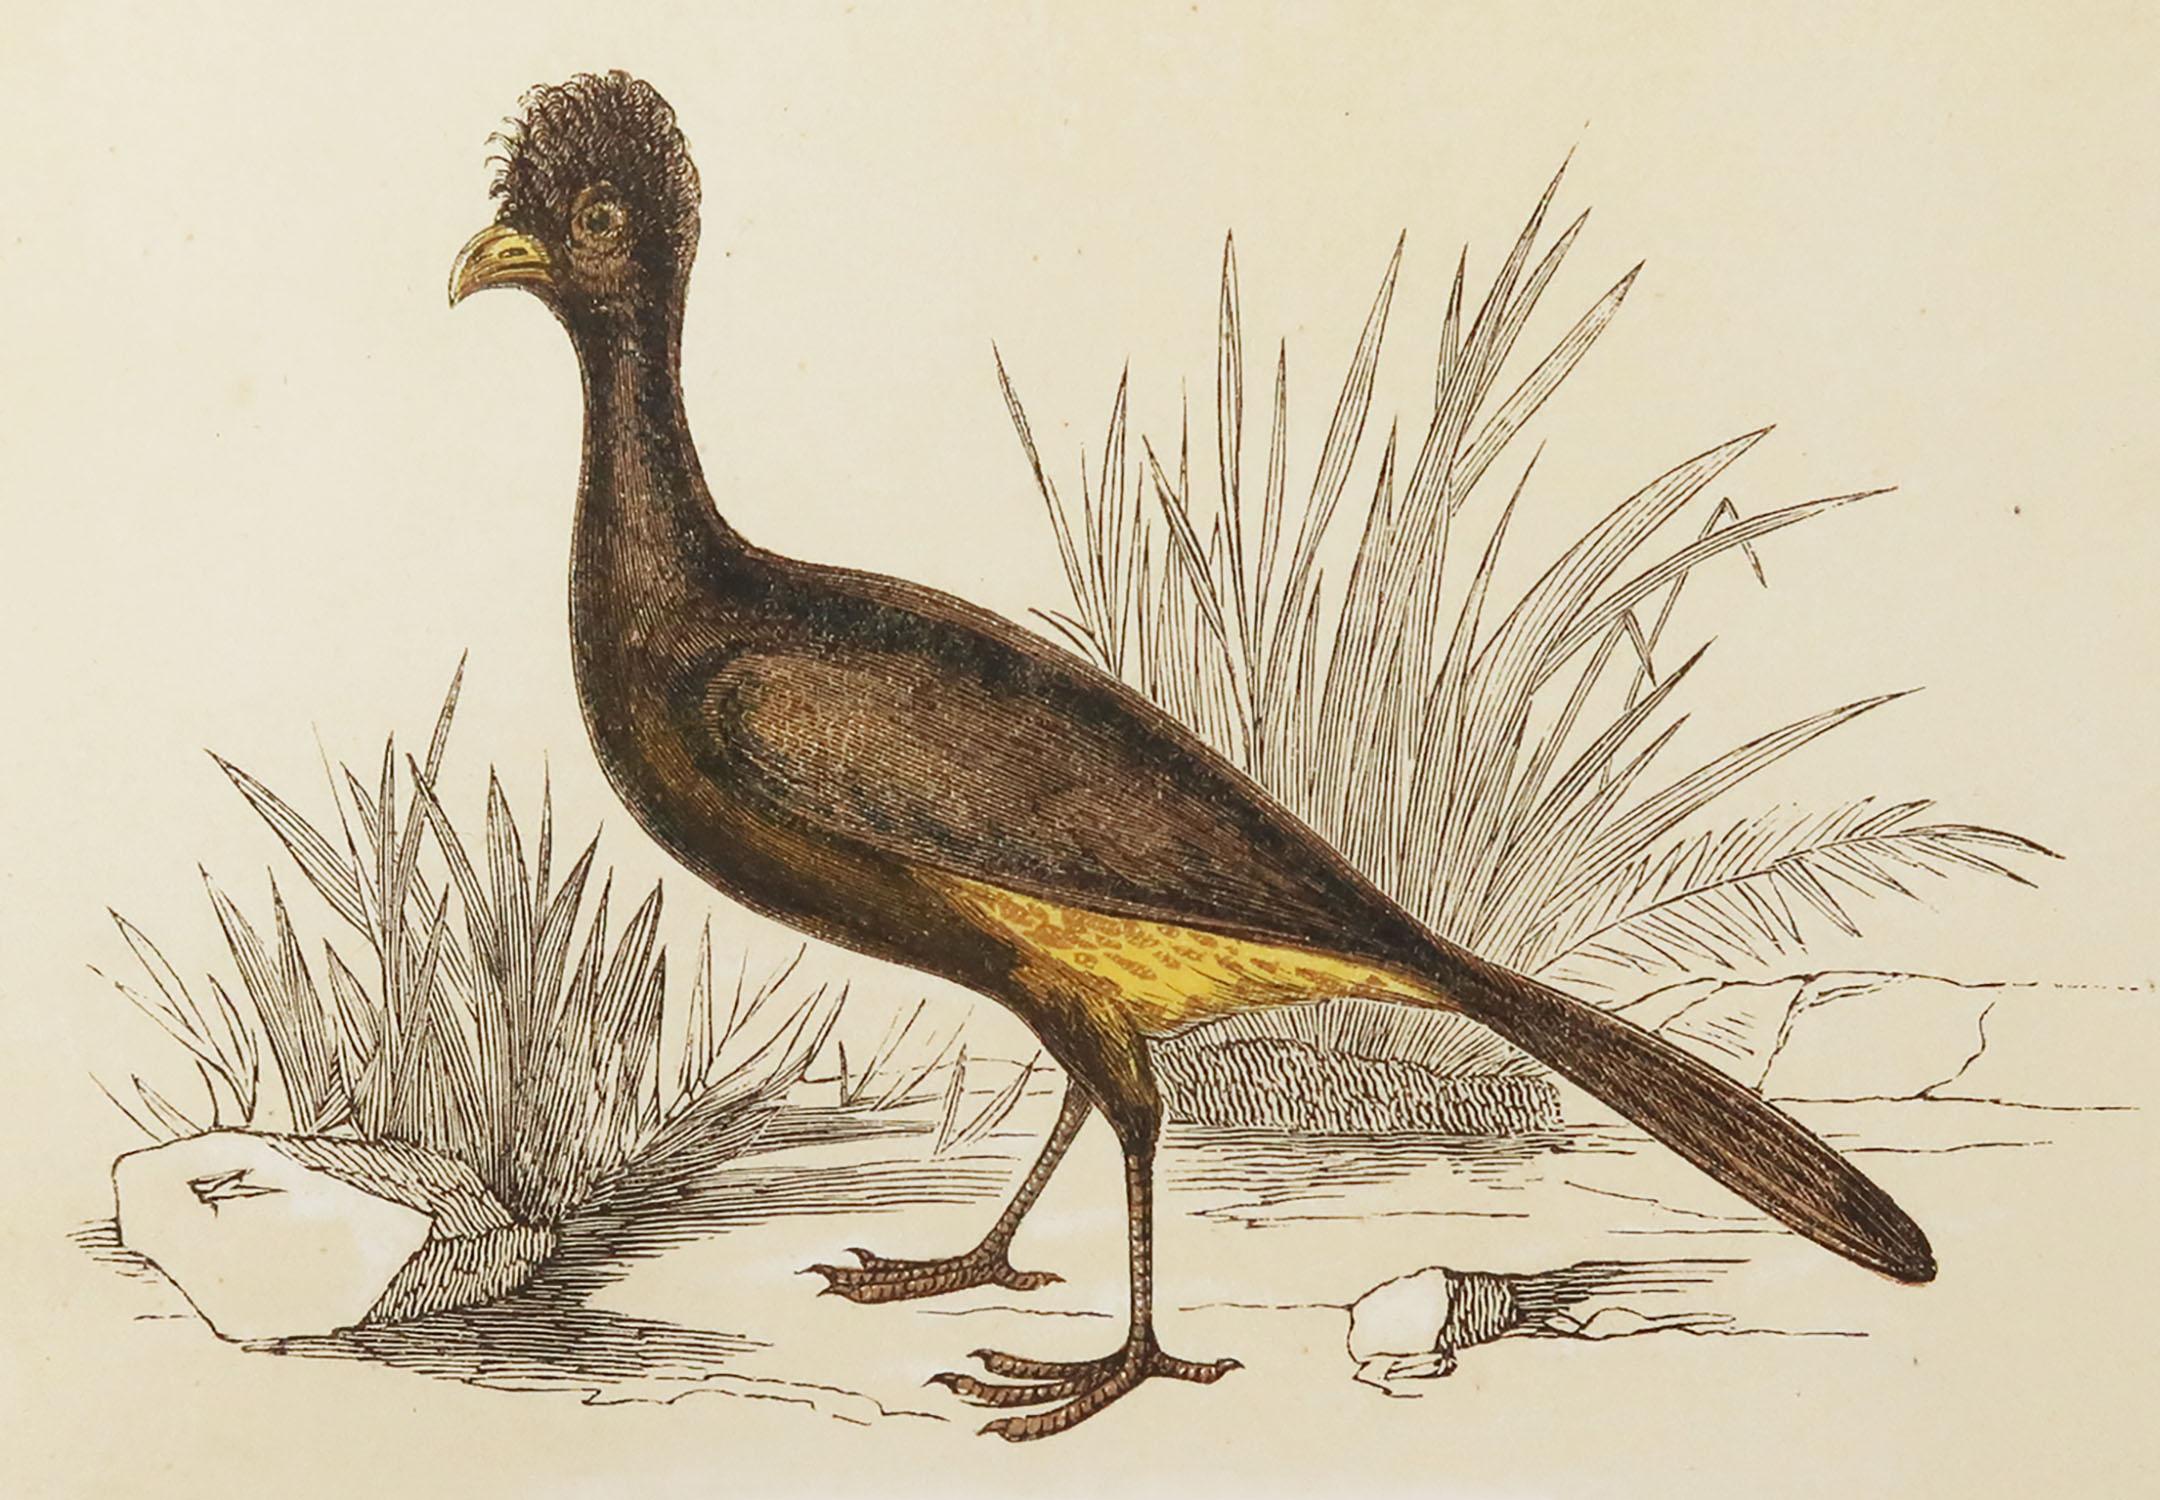 Great image of a crested curassow

Unframed. It gives you the option of perhaps making a set up using your own choice of frames.

Lithograph with original color.

Published by Tallis, circa 1850

Crudely inscribed title has been erased at